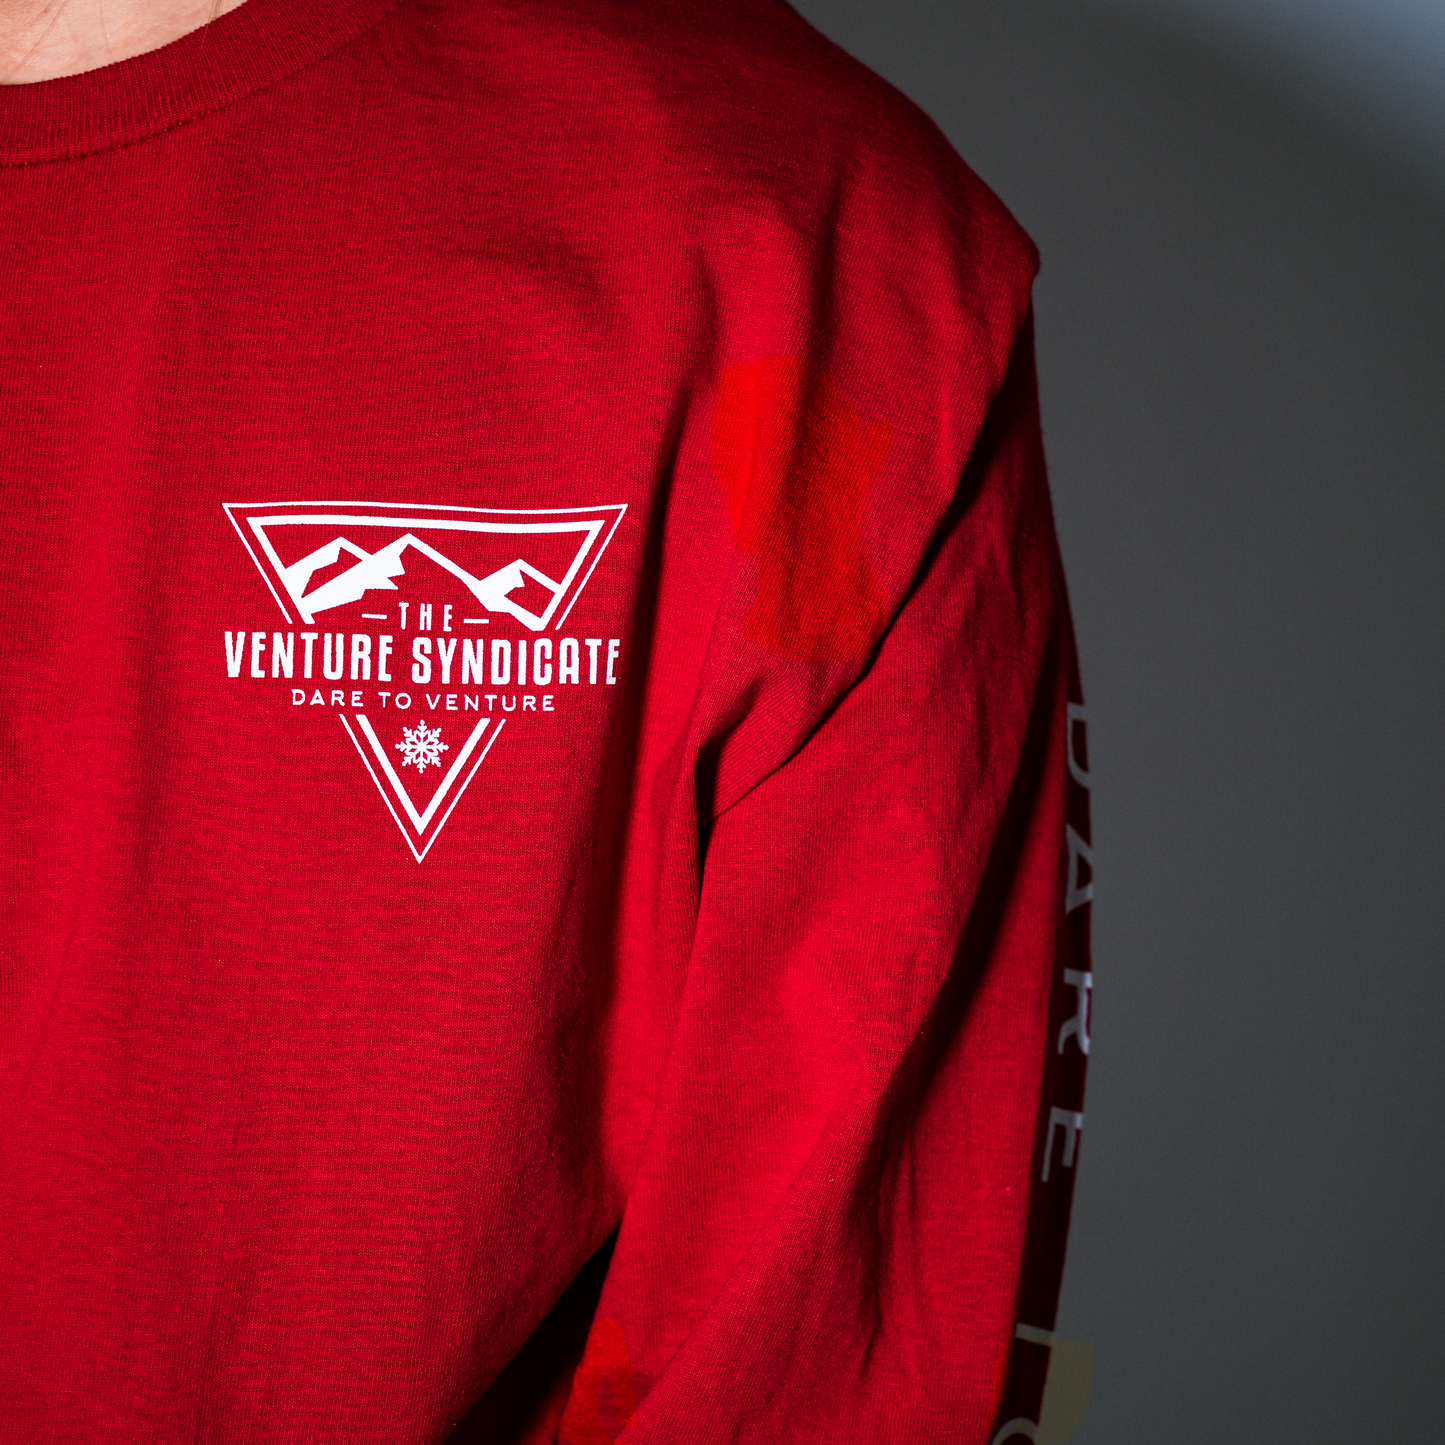 Graphic venture syndicate logo on long sleeve